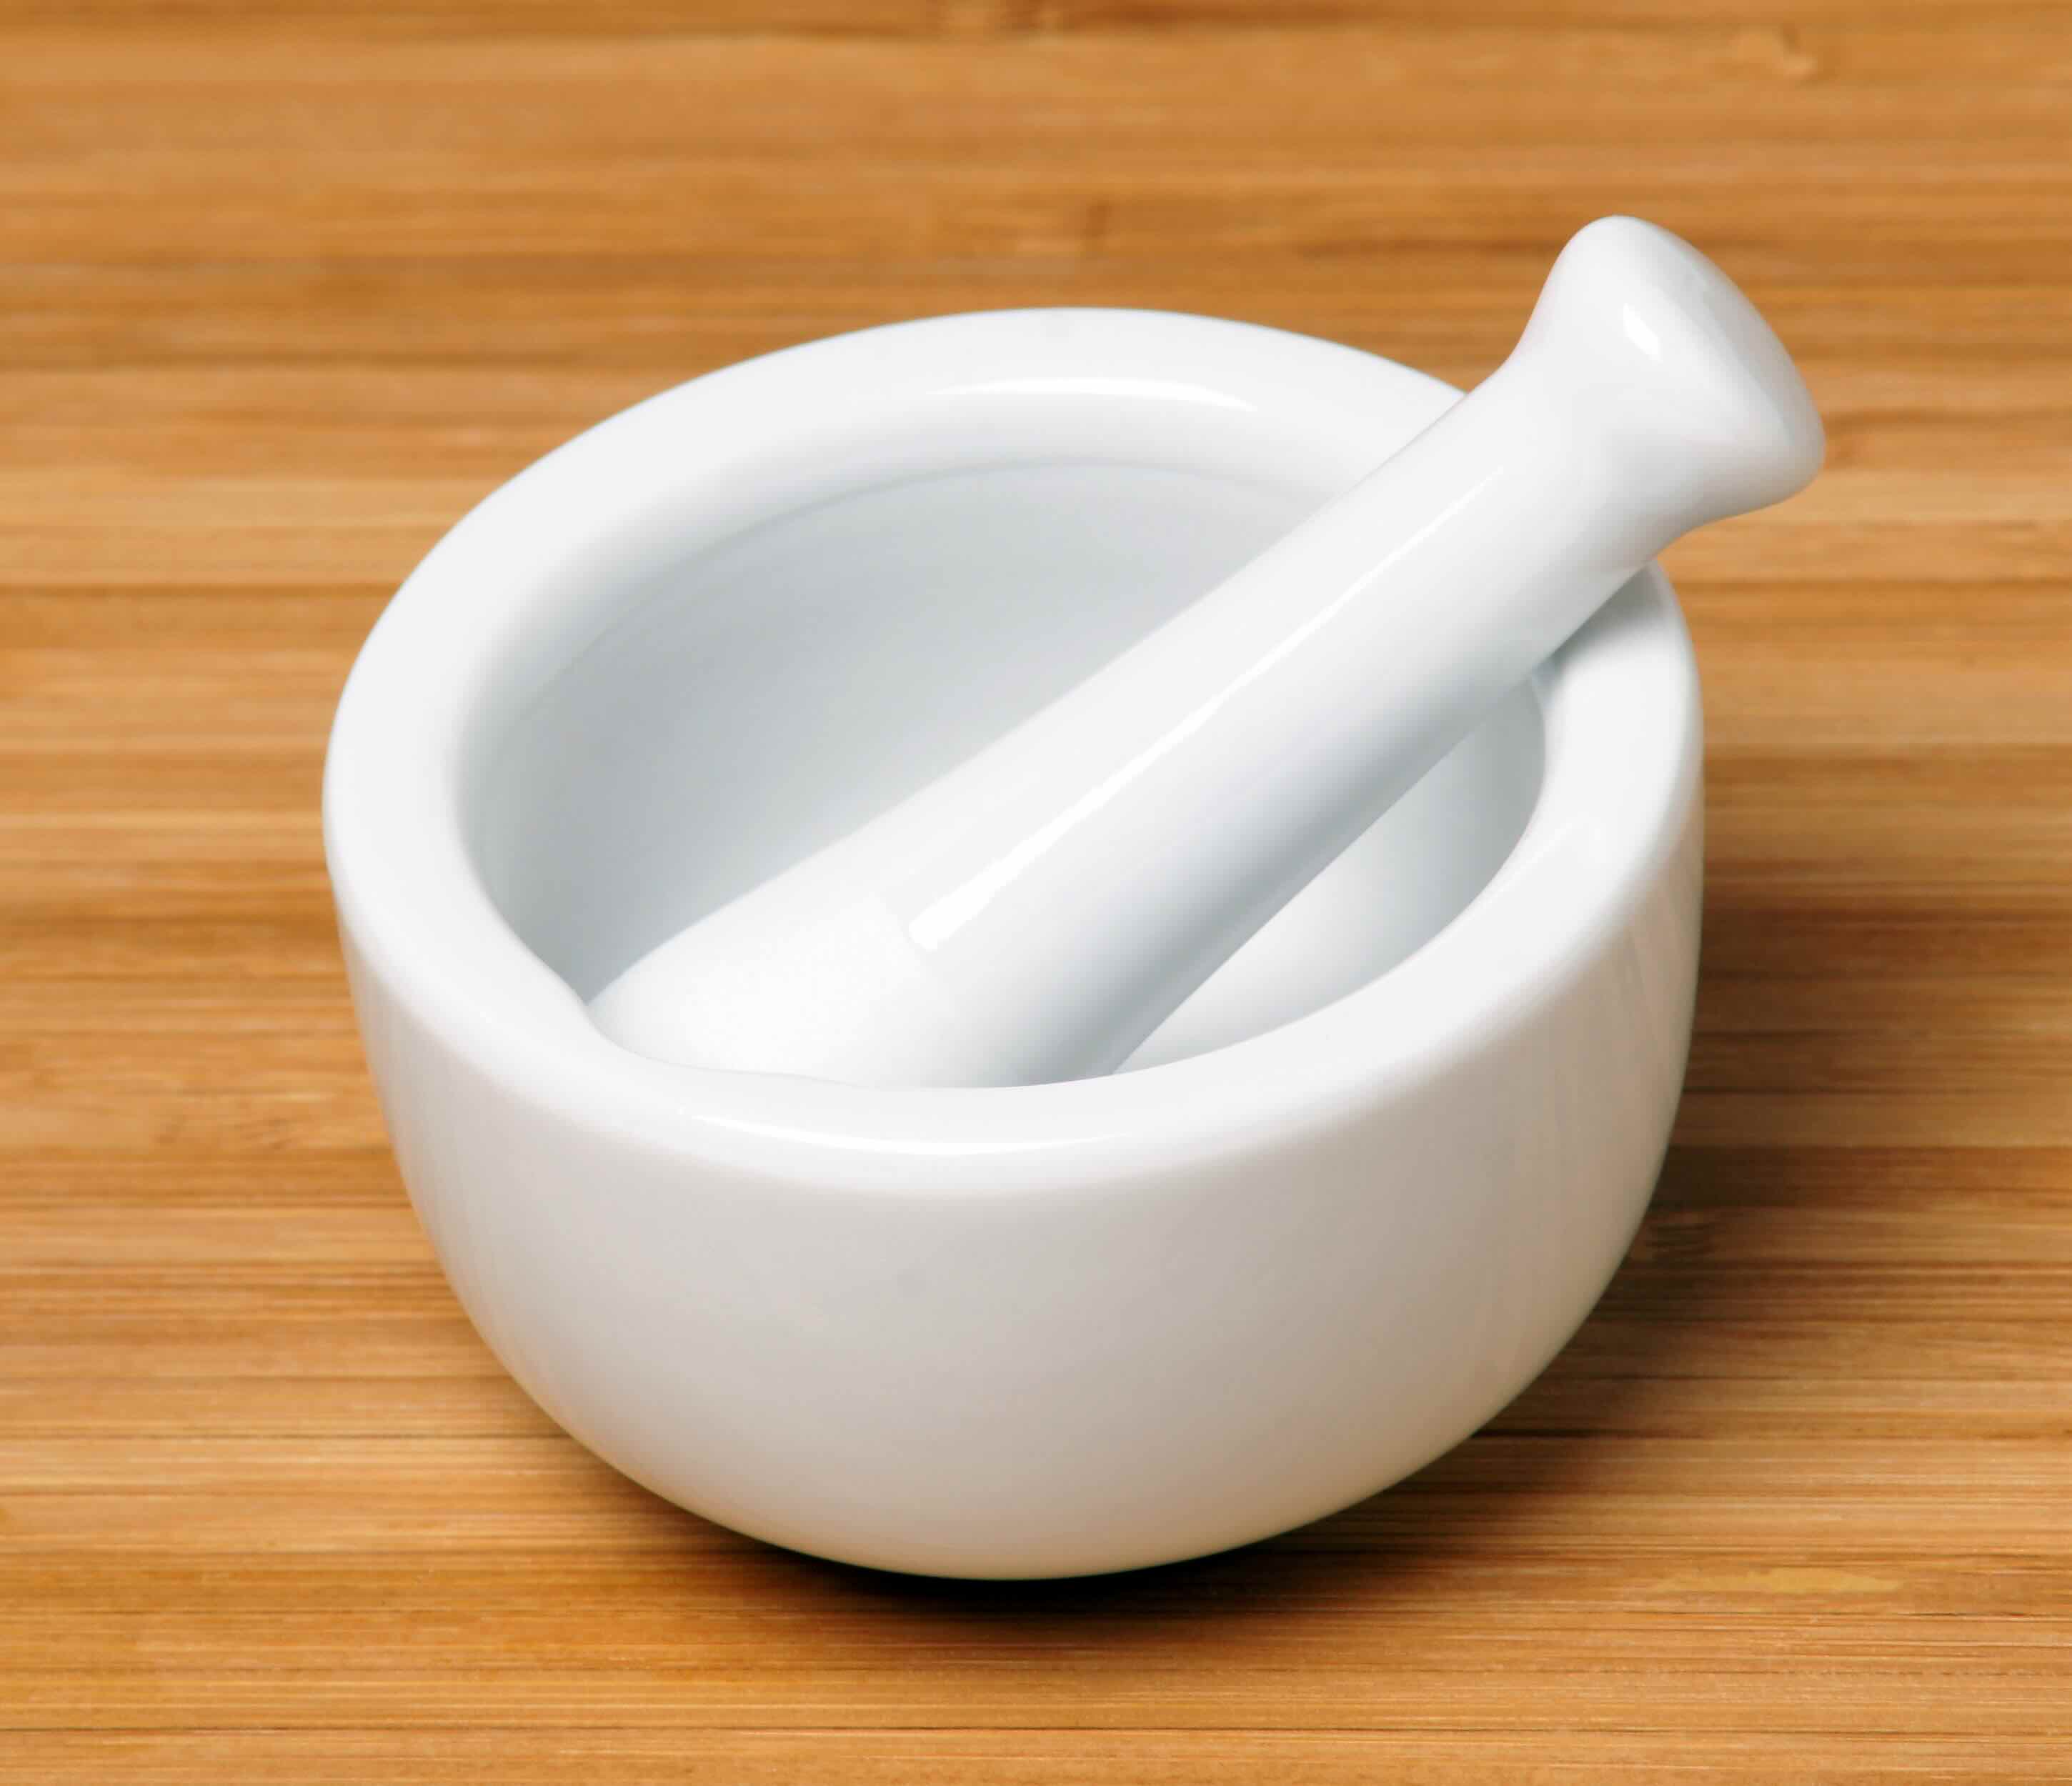 Mortar and Pestle Review: Unveiling the Perfect Kitchen Tool